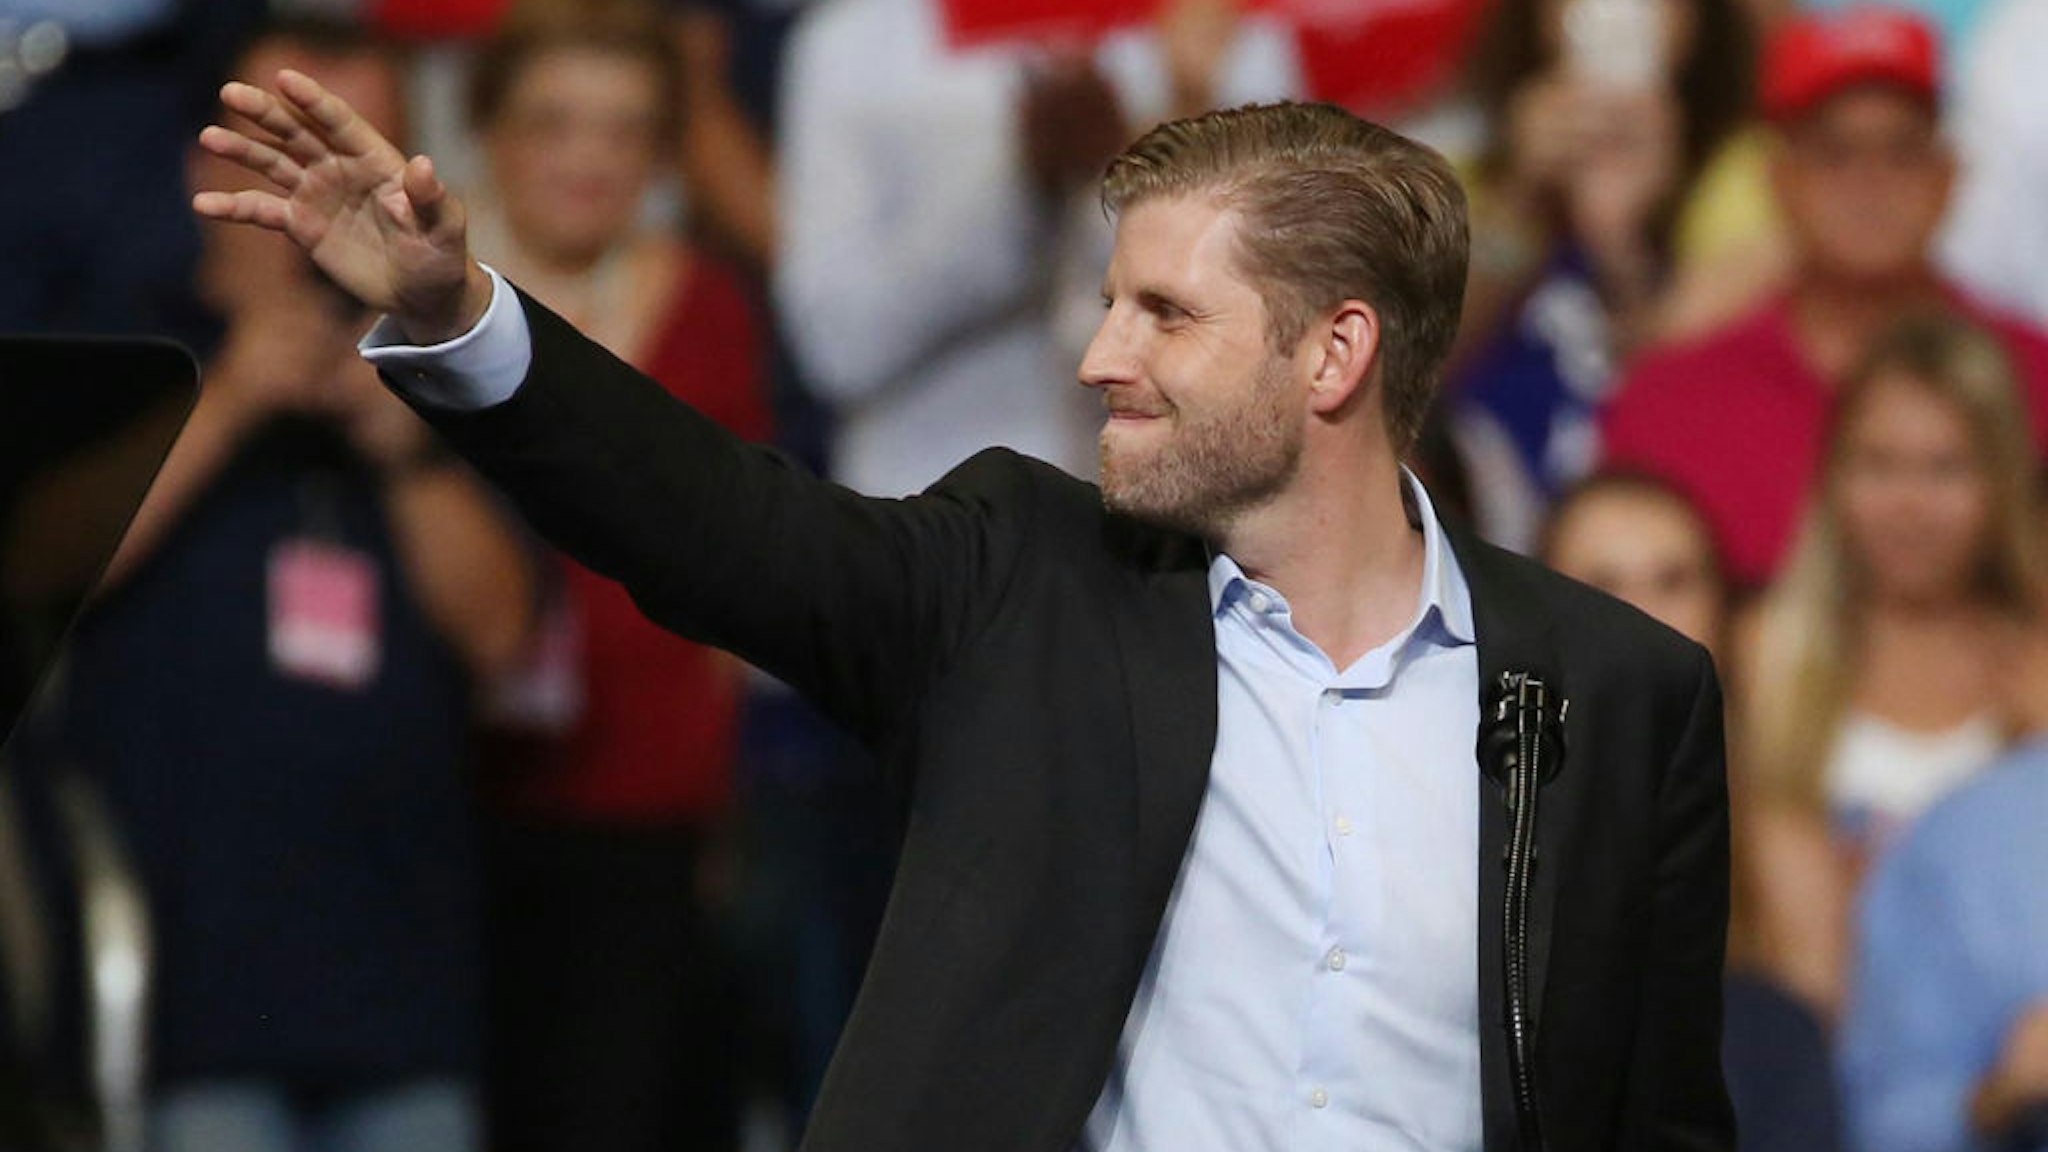 Eric Trump waves during the President Trump campaign rally at the Amway Center in downtown Orlando, Fla., on Tuesday, June 18, 2019.